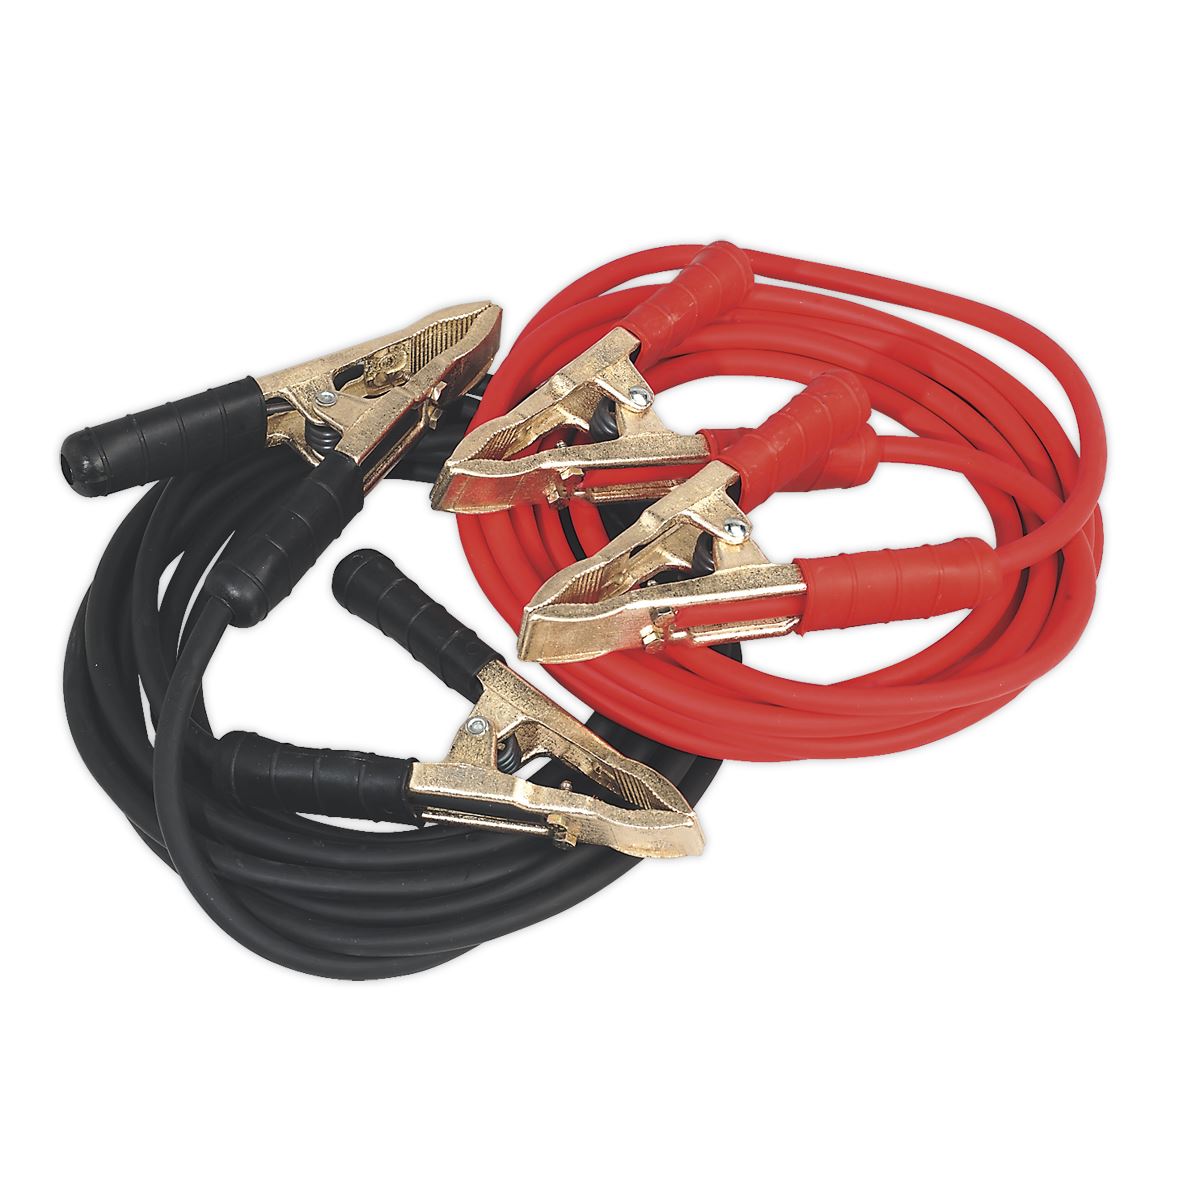 Sealey Booster Cables Extra-Heavy-Duty Clamps 25mm² x 5m Copper 650A